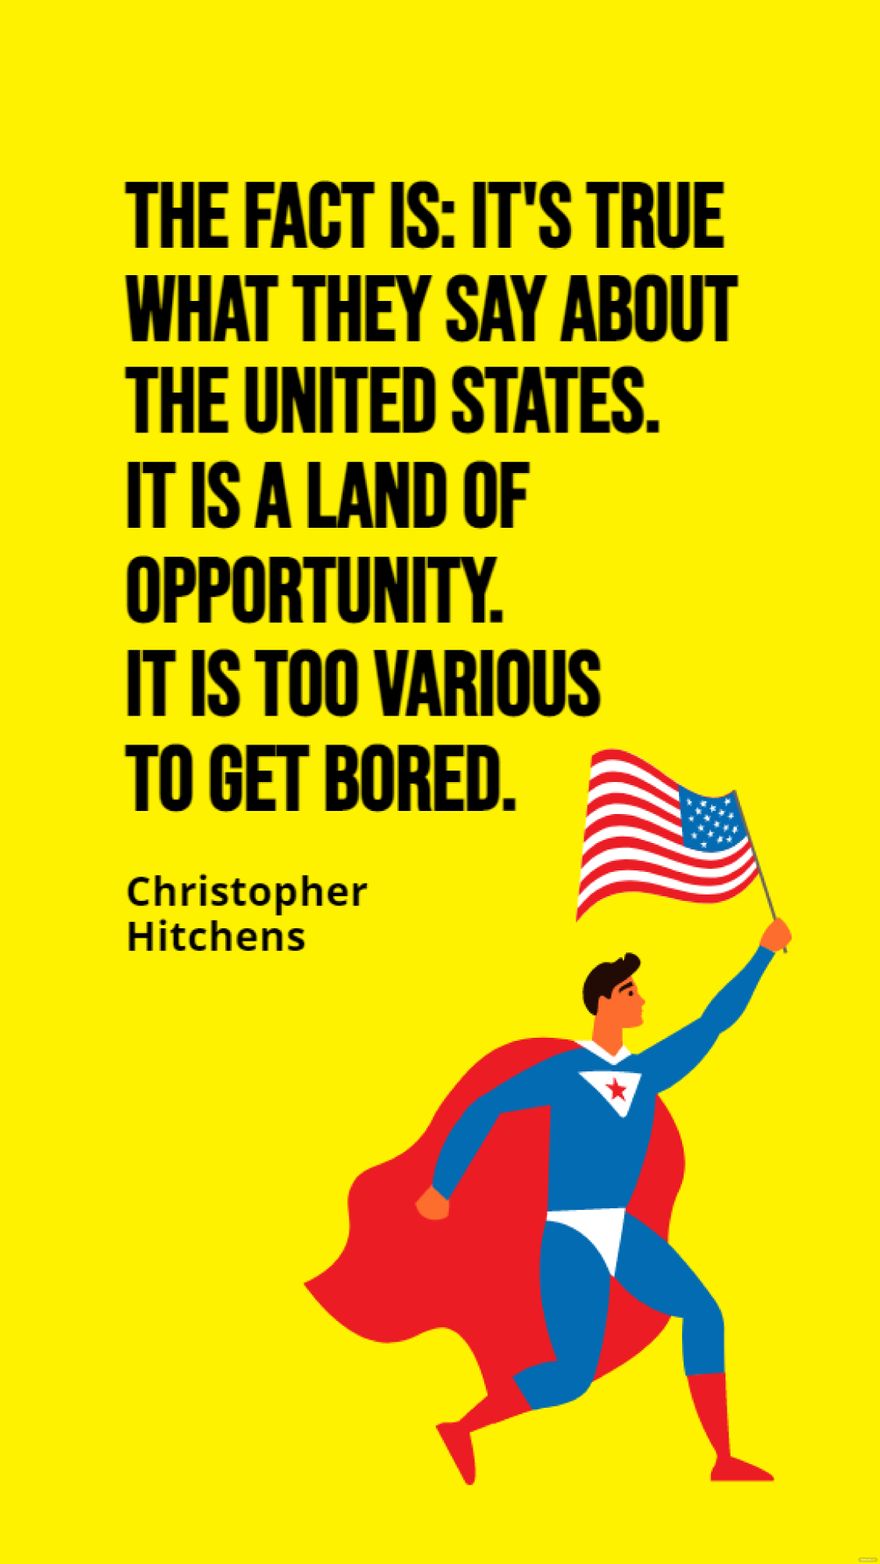 Free Christopher Hitchens - The fact is: It's true what they say about the United States. It is a land of opportunity. It is too various to get bored in JPG